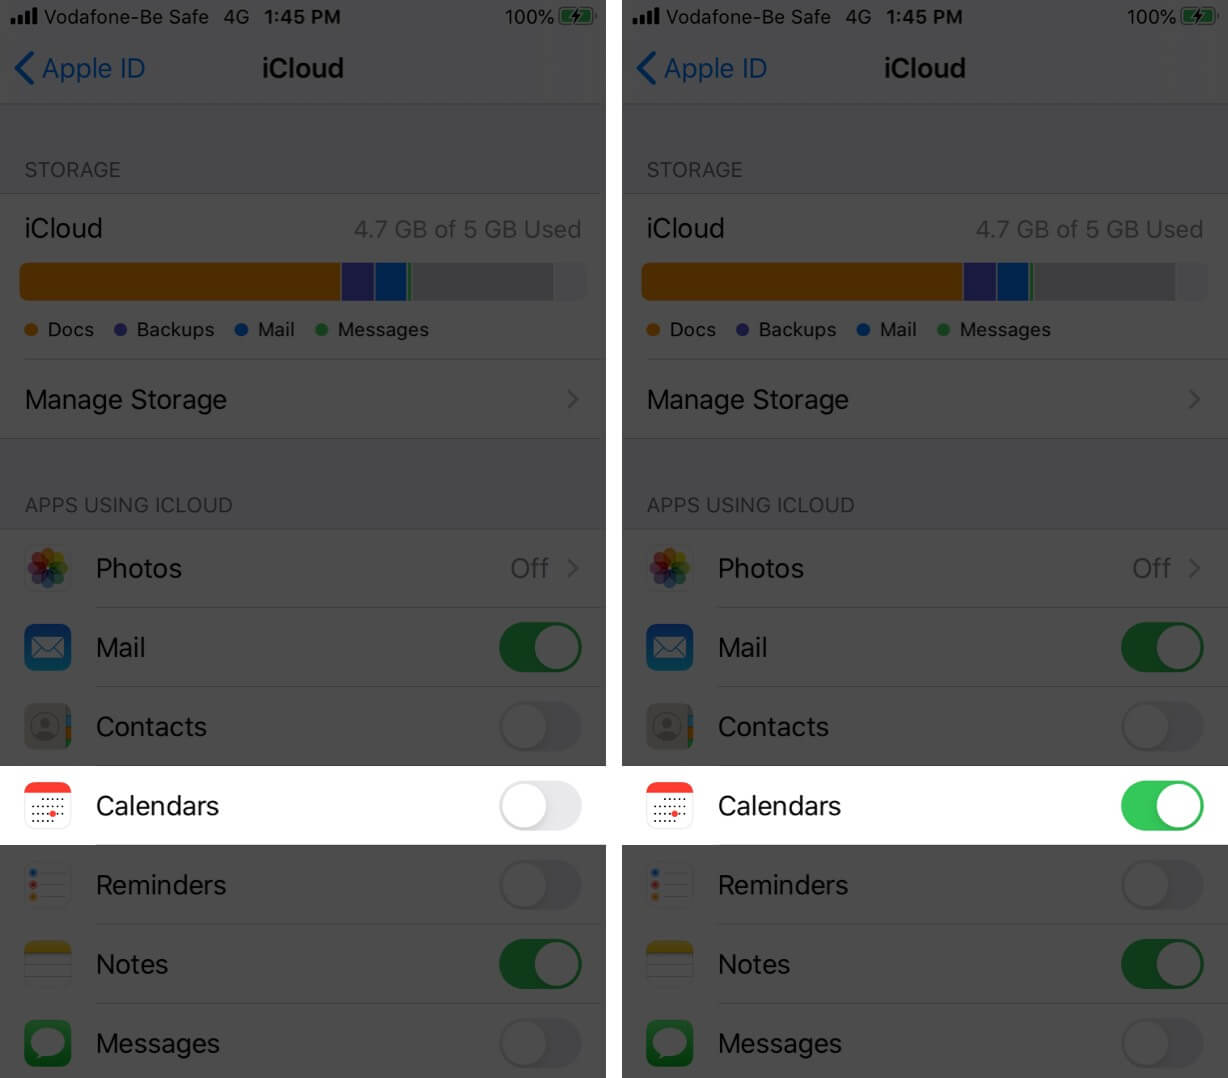 Turn ON Calendar and Sync with iCloud on iPhone